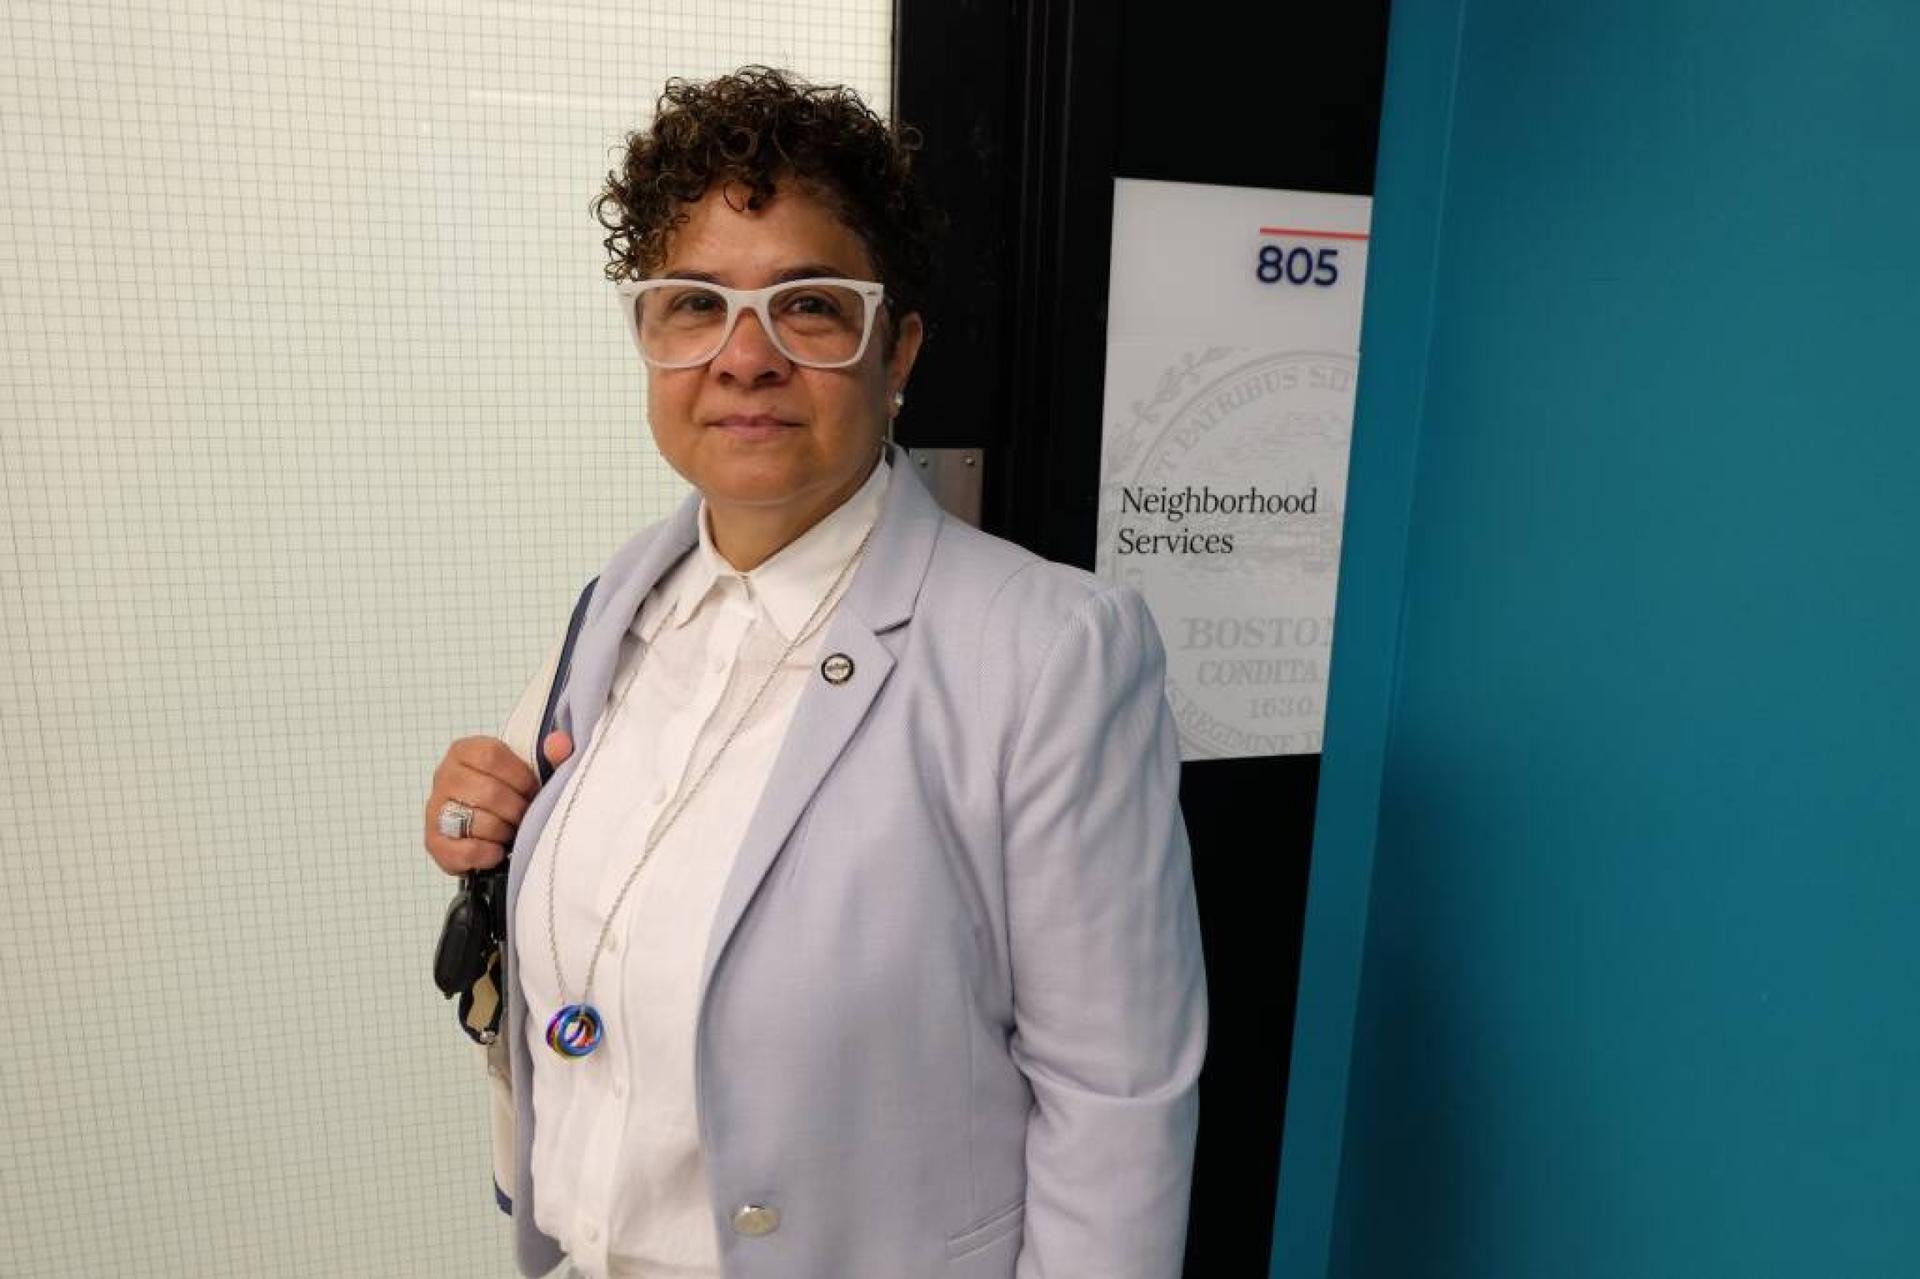 Gladys Oliveros is the Latinx Community Liaison for the City of Boston, and one of two main individuals who work one on one with new migrants to help them find emergency shelter at hotels, food, and even formula for infants.